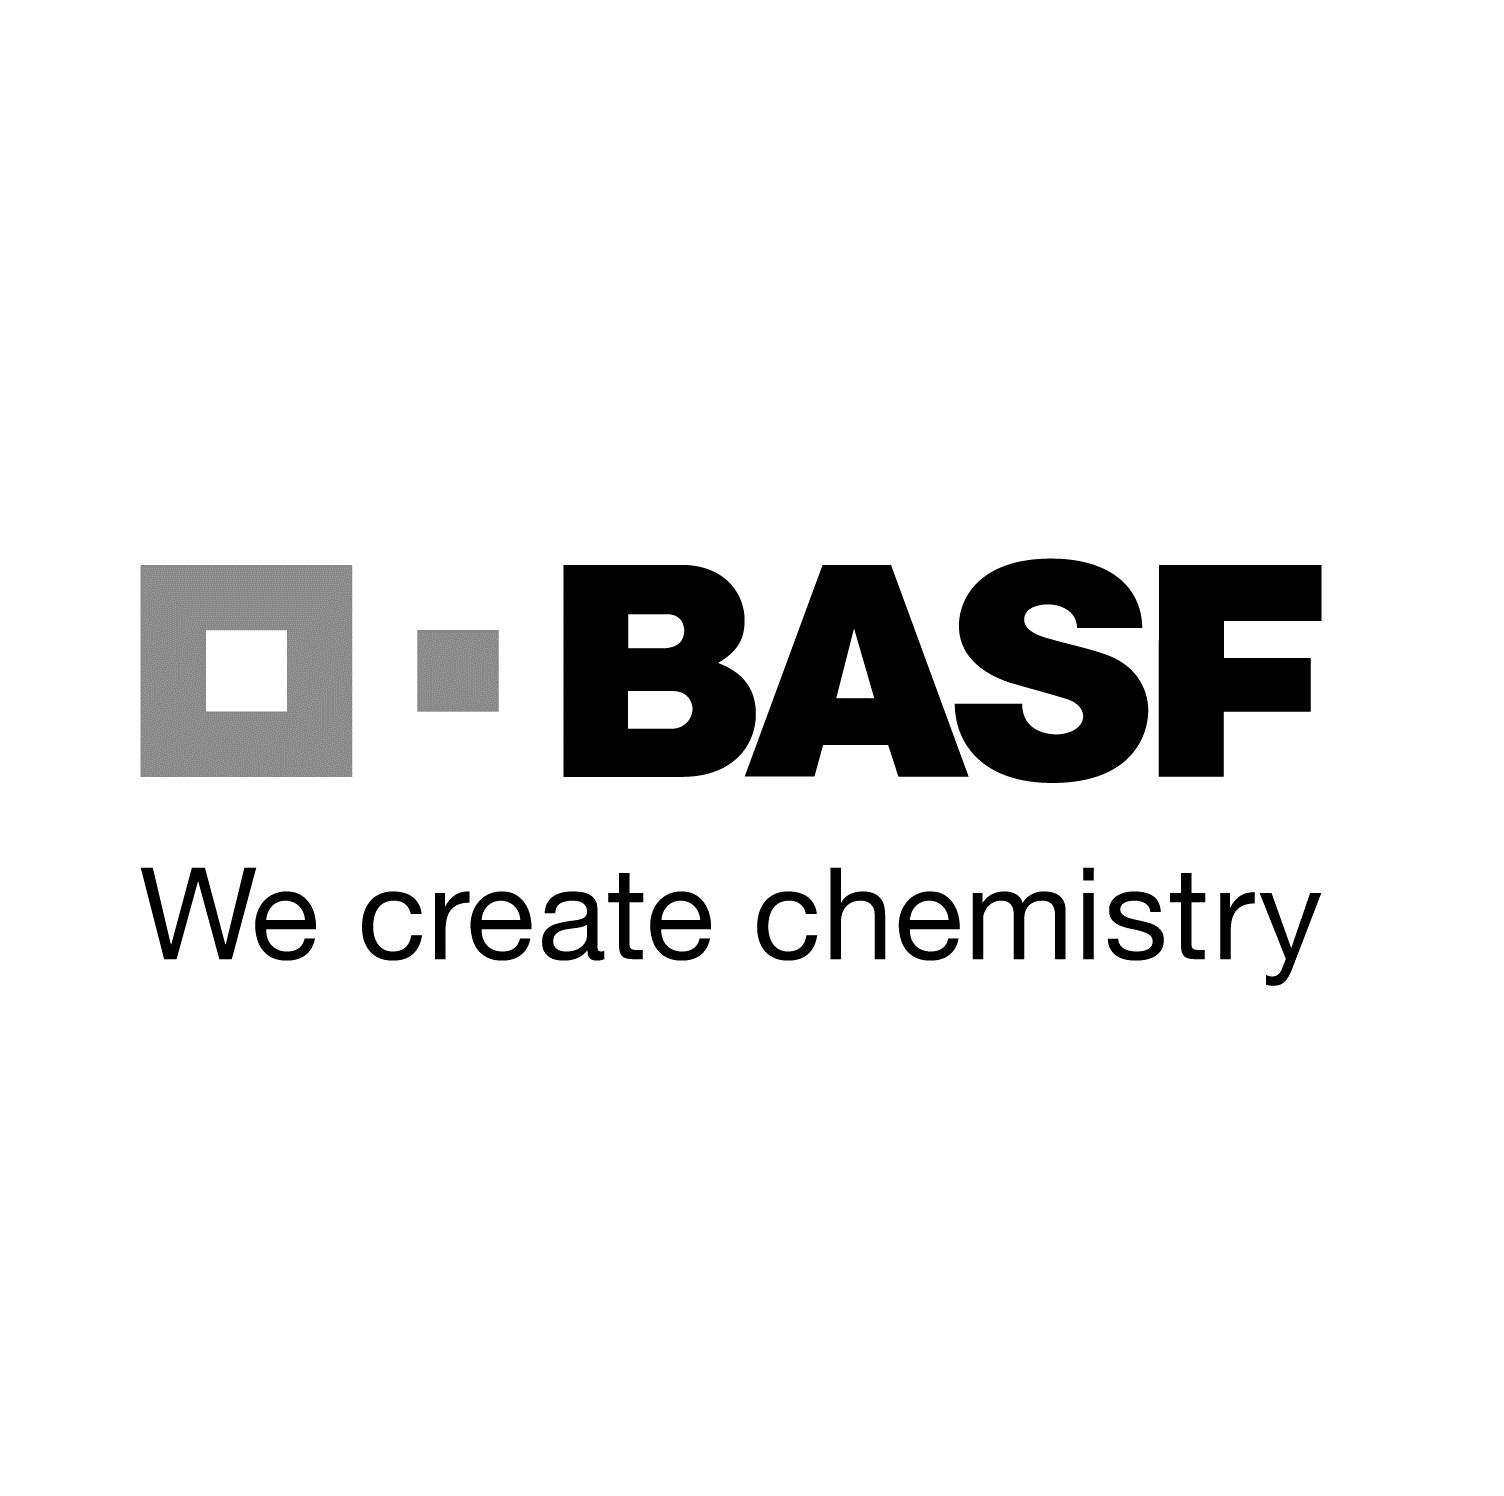 BASF Isocyanate Units in Geismar US Restart and Normal Production